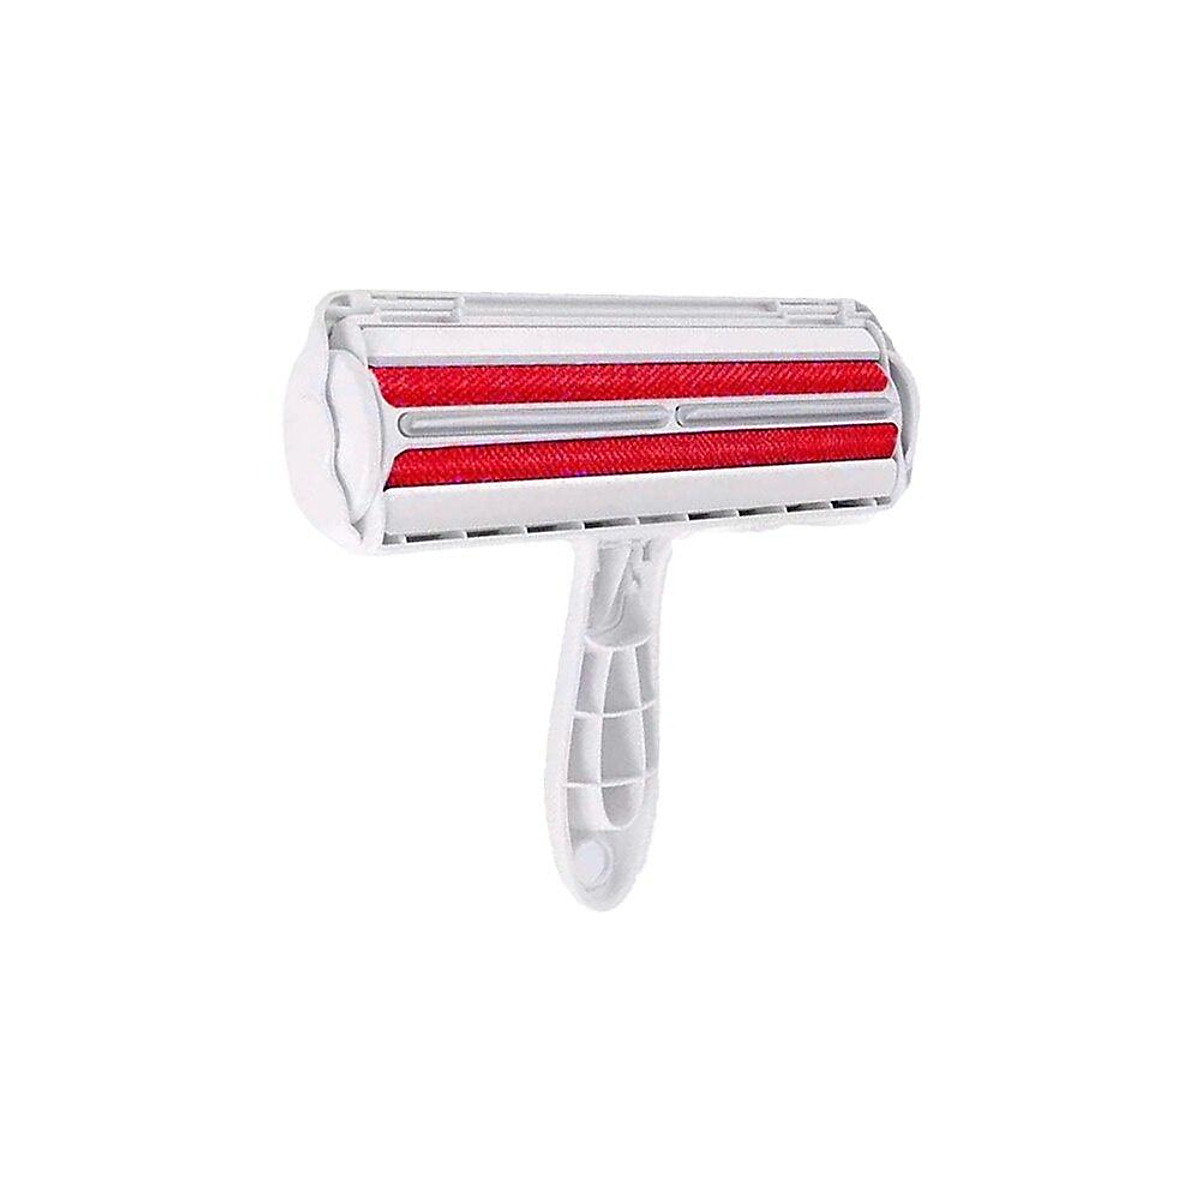 Mua 2-Way Pet Hair Remover Roller Fur Away Lint Sticking Roller Reusable  Dog Cat Hair Cleaning Brush From Furniture Sofa Clothes - Red Set tại  Ezihomeliving